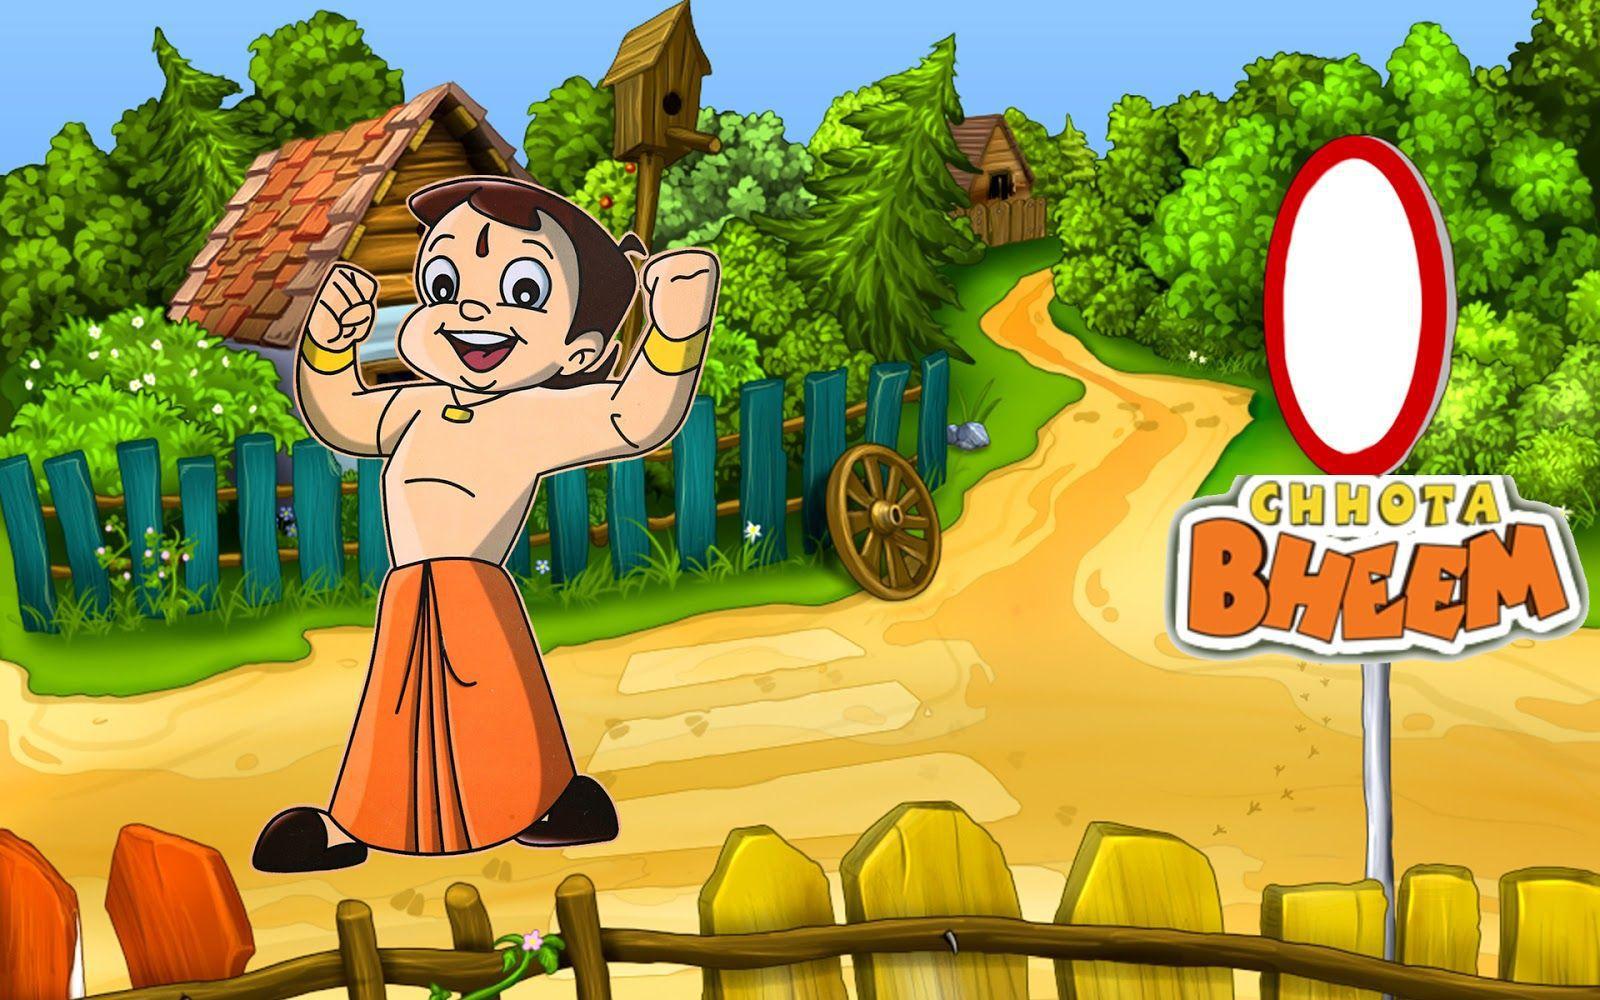 Chhota Bheem PNG Transparent Images Free Download - Pngfre